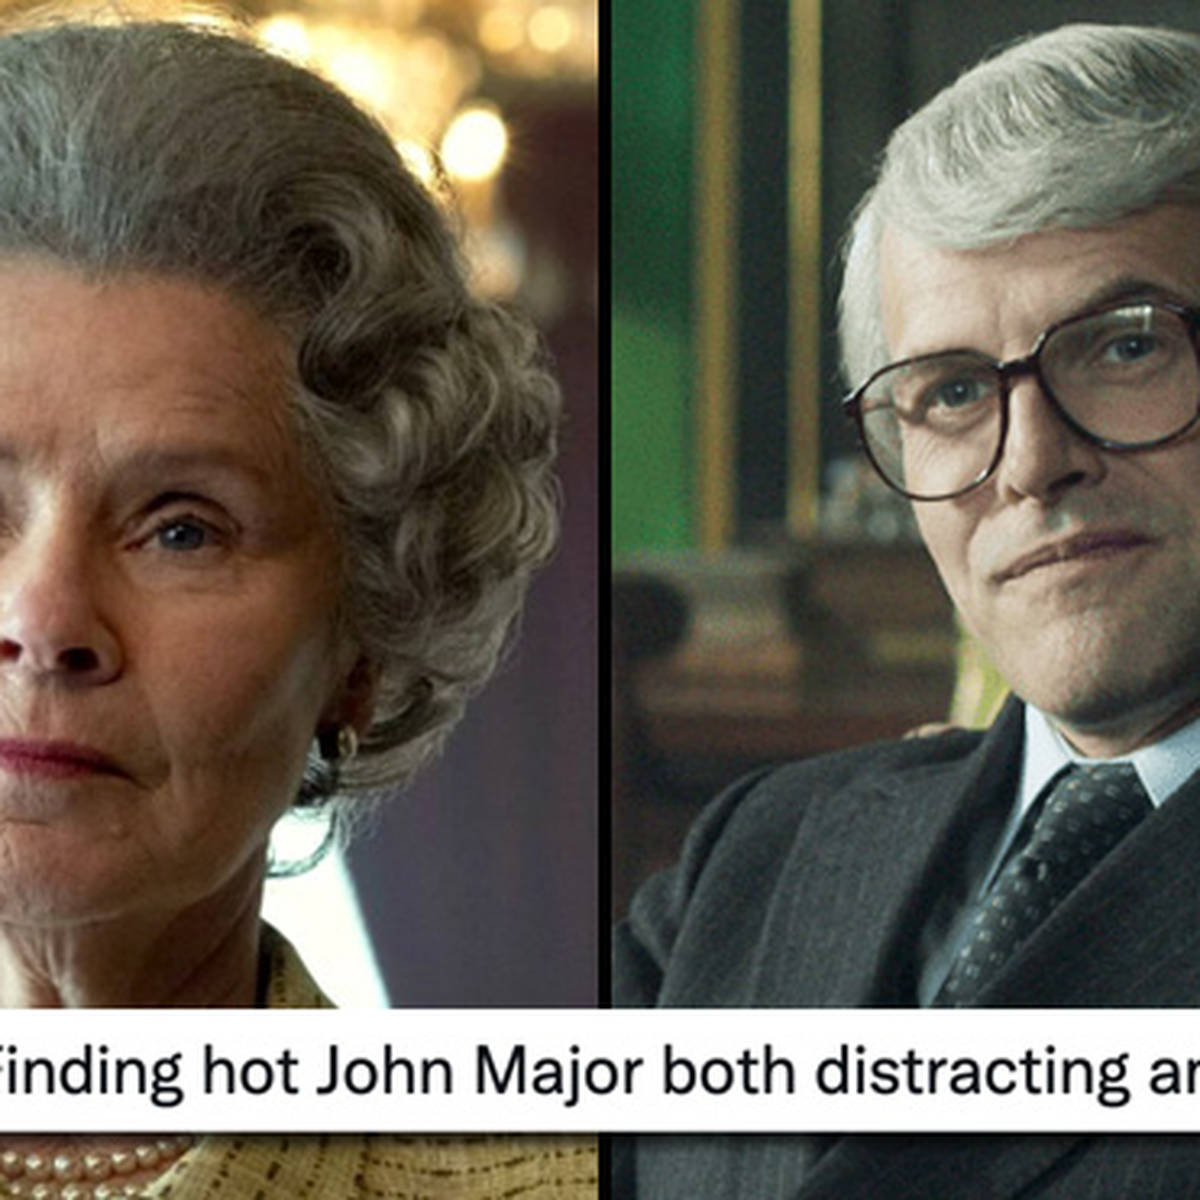 The Crown viewers are thirsting over John Major and I blame Jonny Lee Miller  - PopBuzz